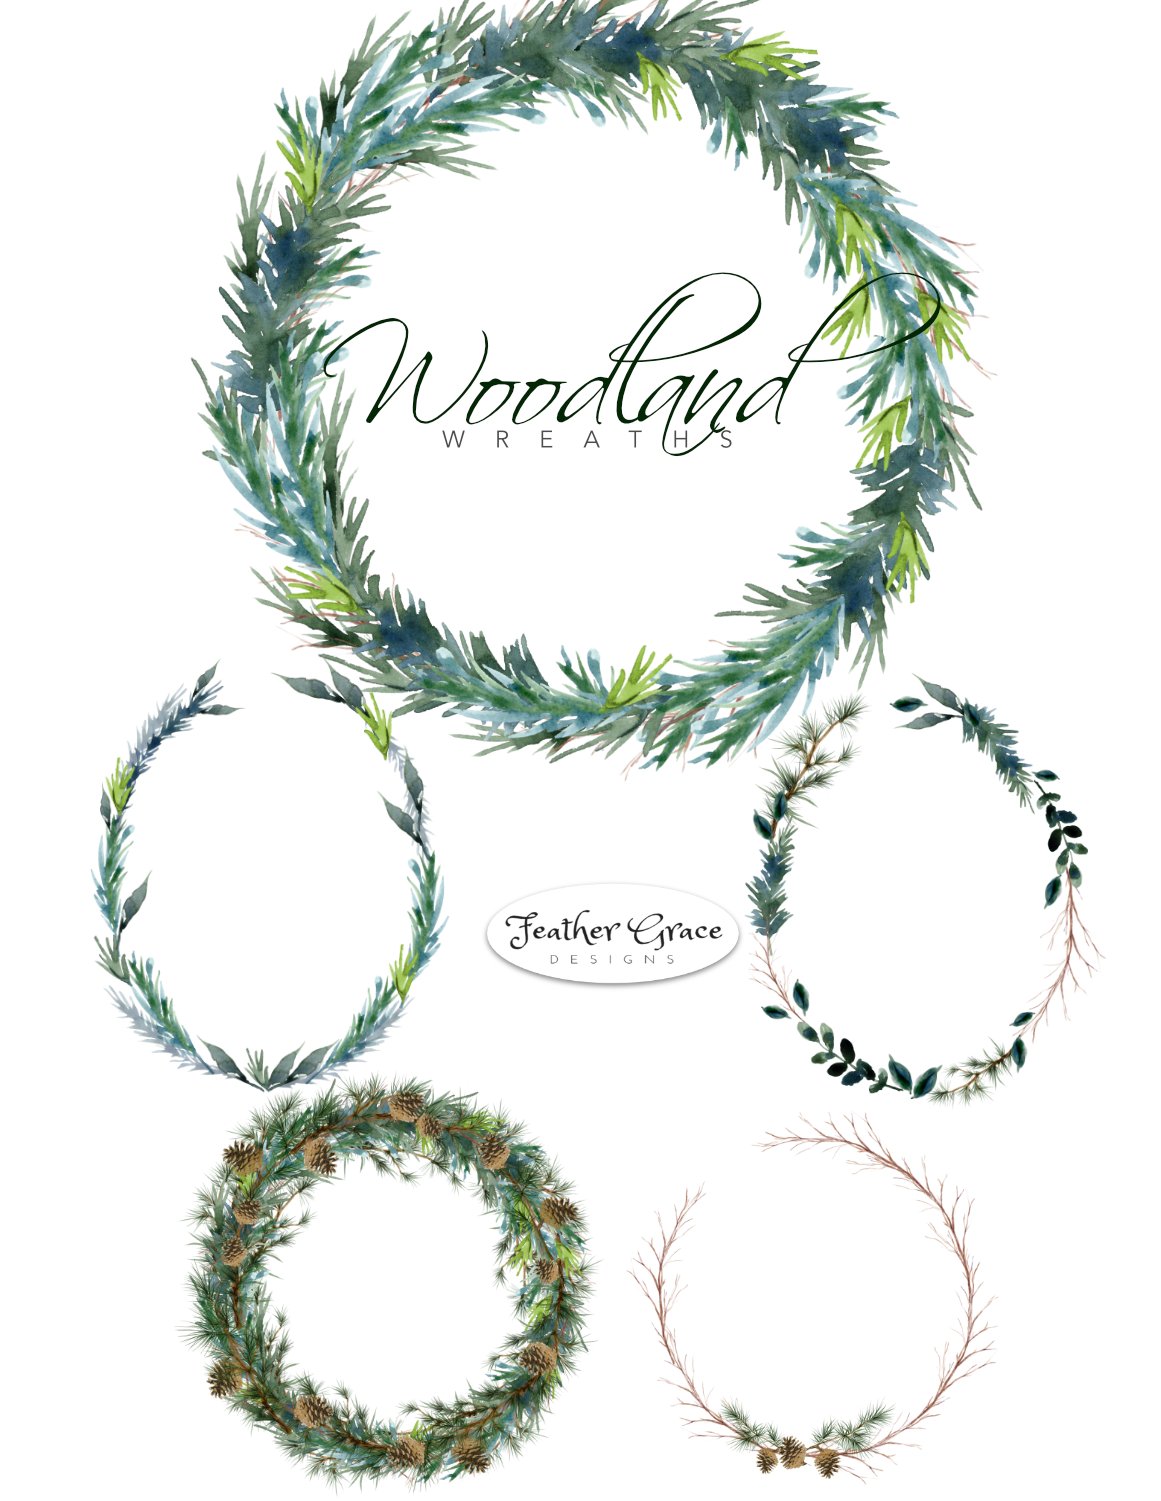 Set of watercolor wreaths and frames.